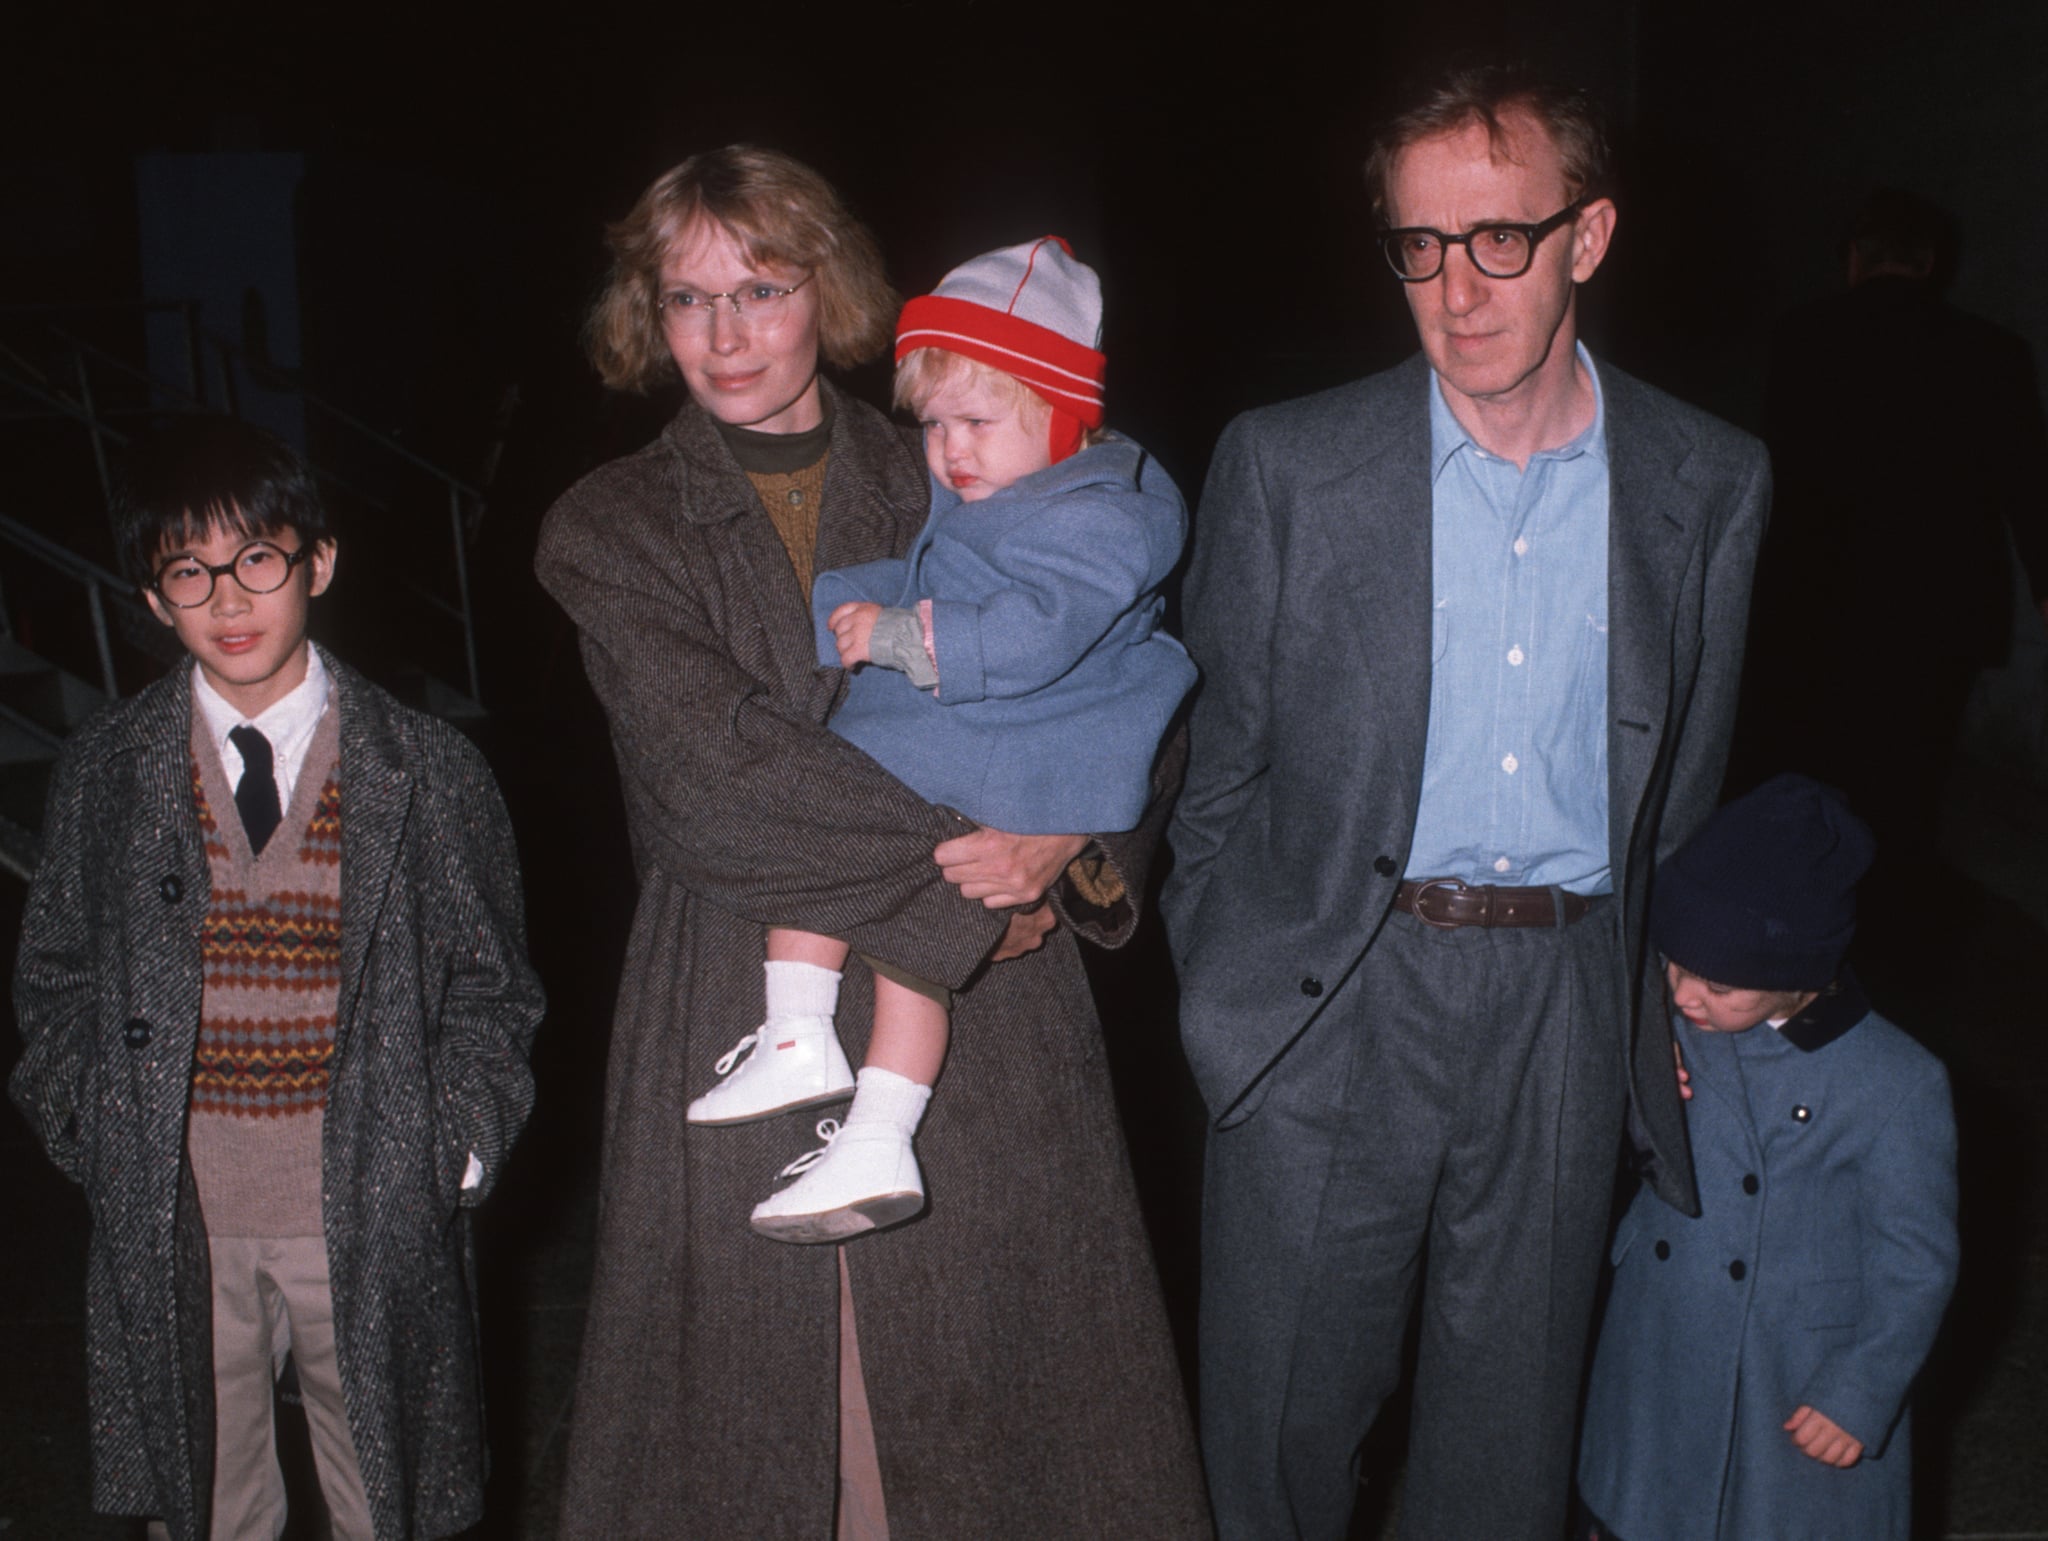 Actor Woody Allen, actress Mia Farrow and children attend The Apple Circus Performance on November 3, 1989 in New York City. (Photo by Ron Galella, Ltd./Ron Galella Collection via Getty Images)